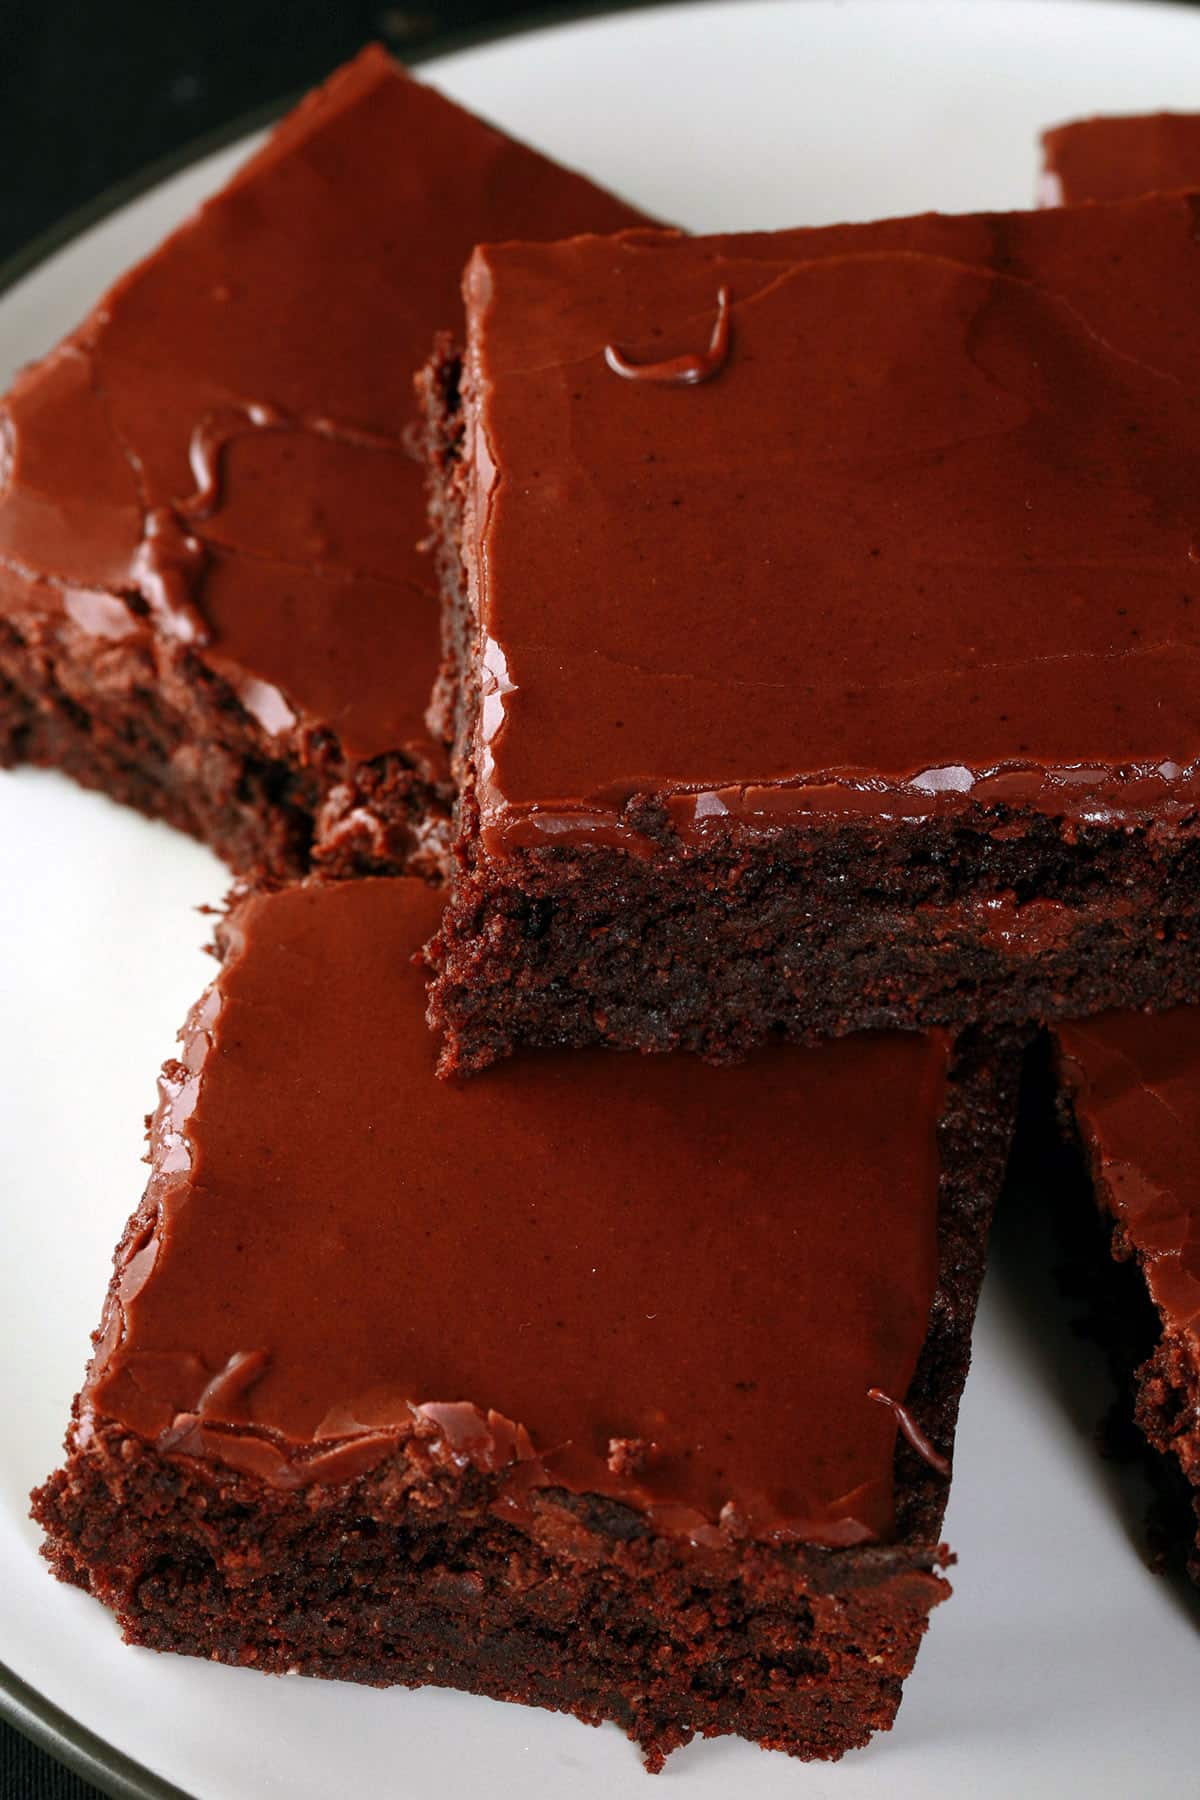 A plate of gluten free brownies with chocolate glaze.